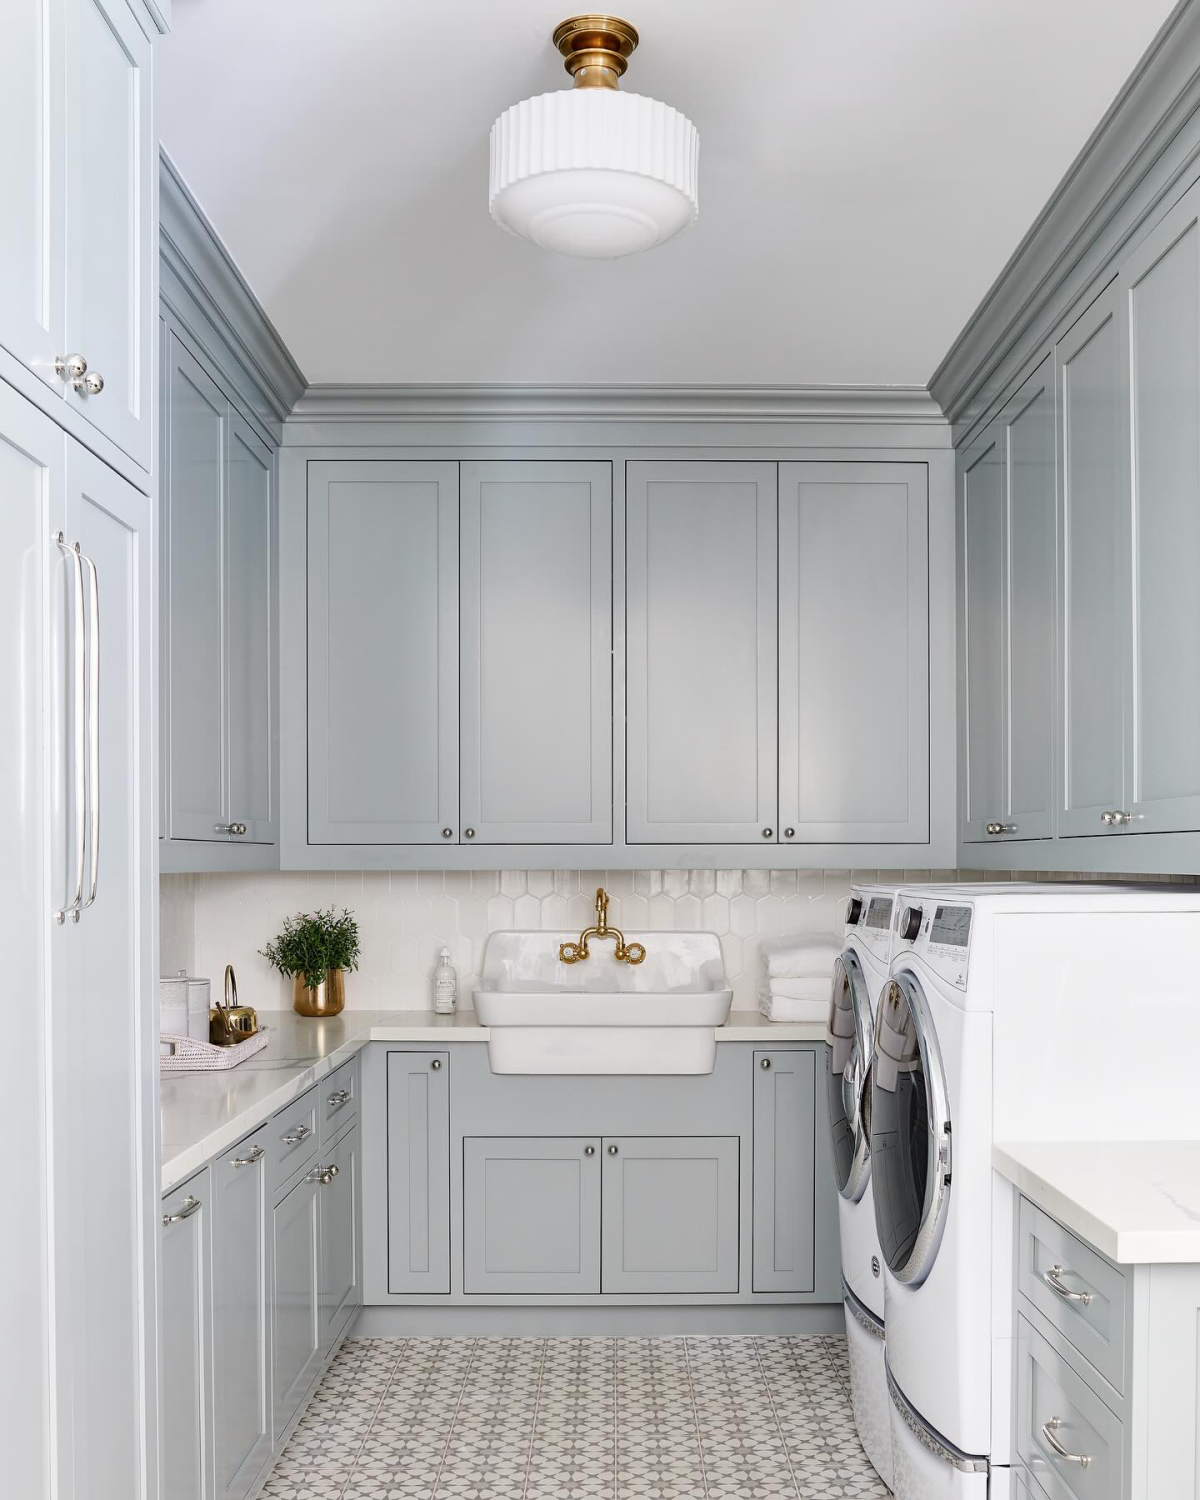 12 Basement Laundry Room Ideas For A Beautiful And Functional Space